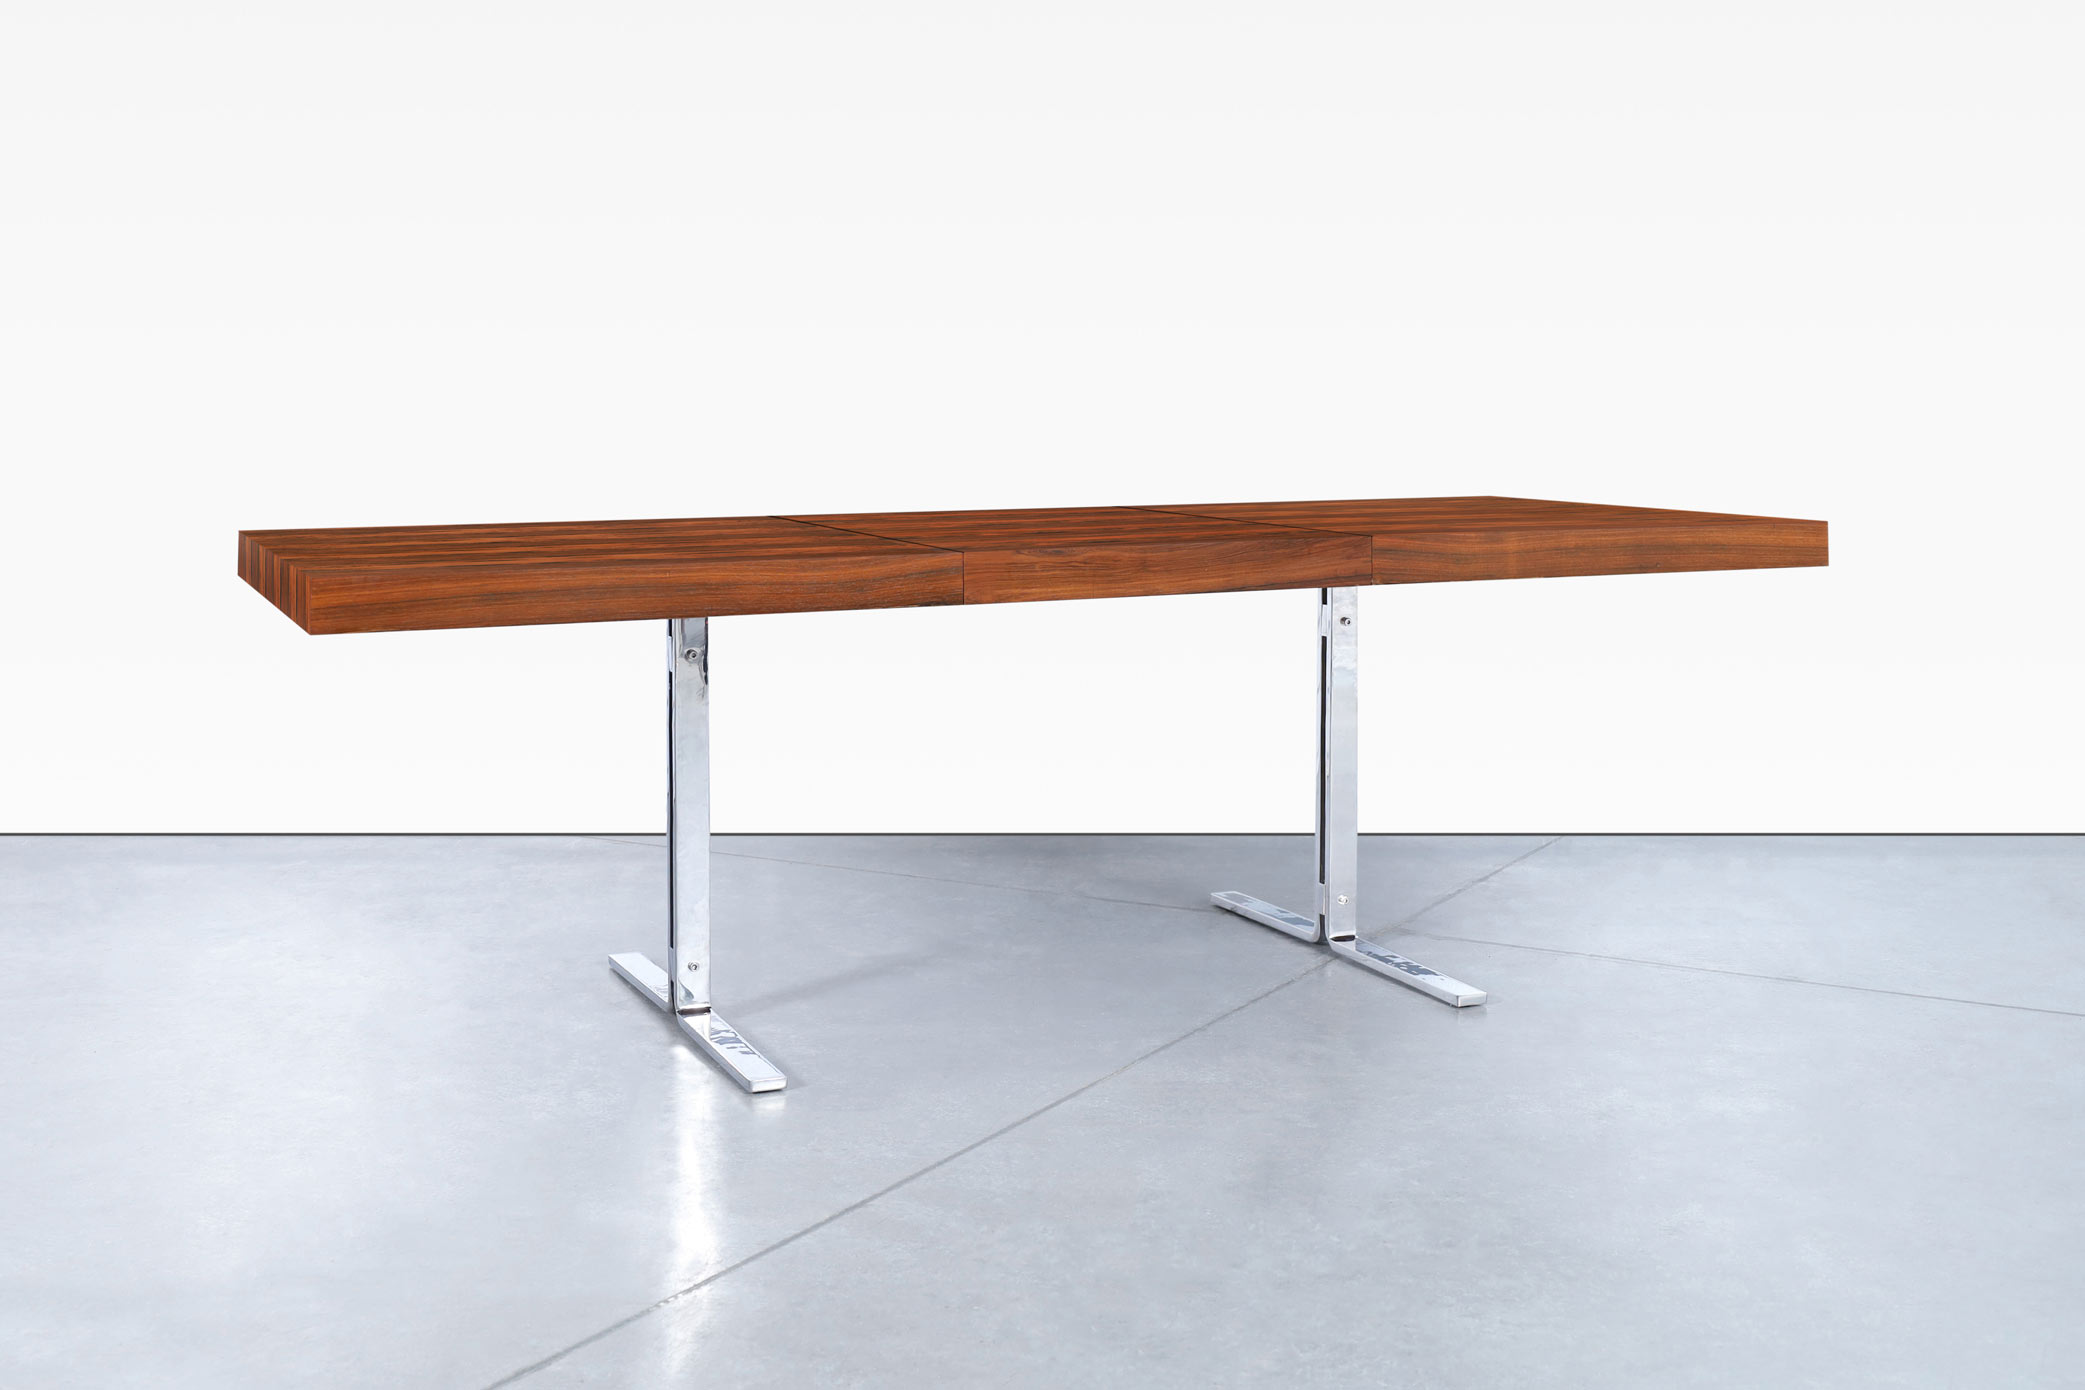 Danish Modern Rosewood Dining Table by Poul Nørreklit for Georg Petersens